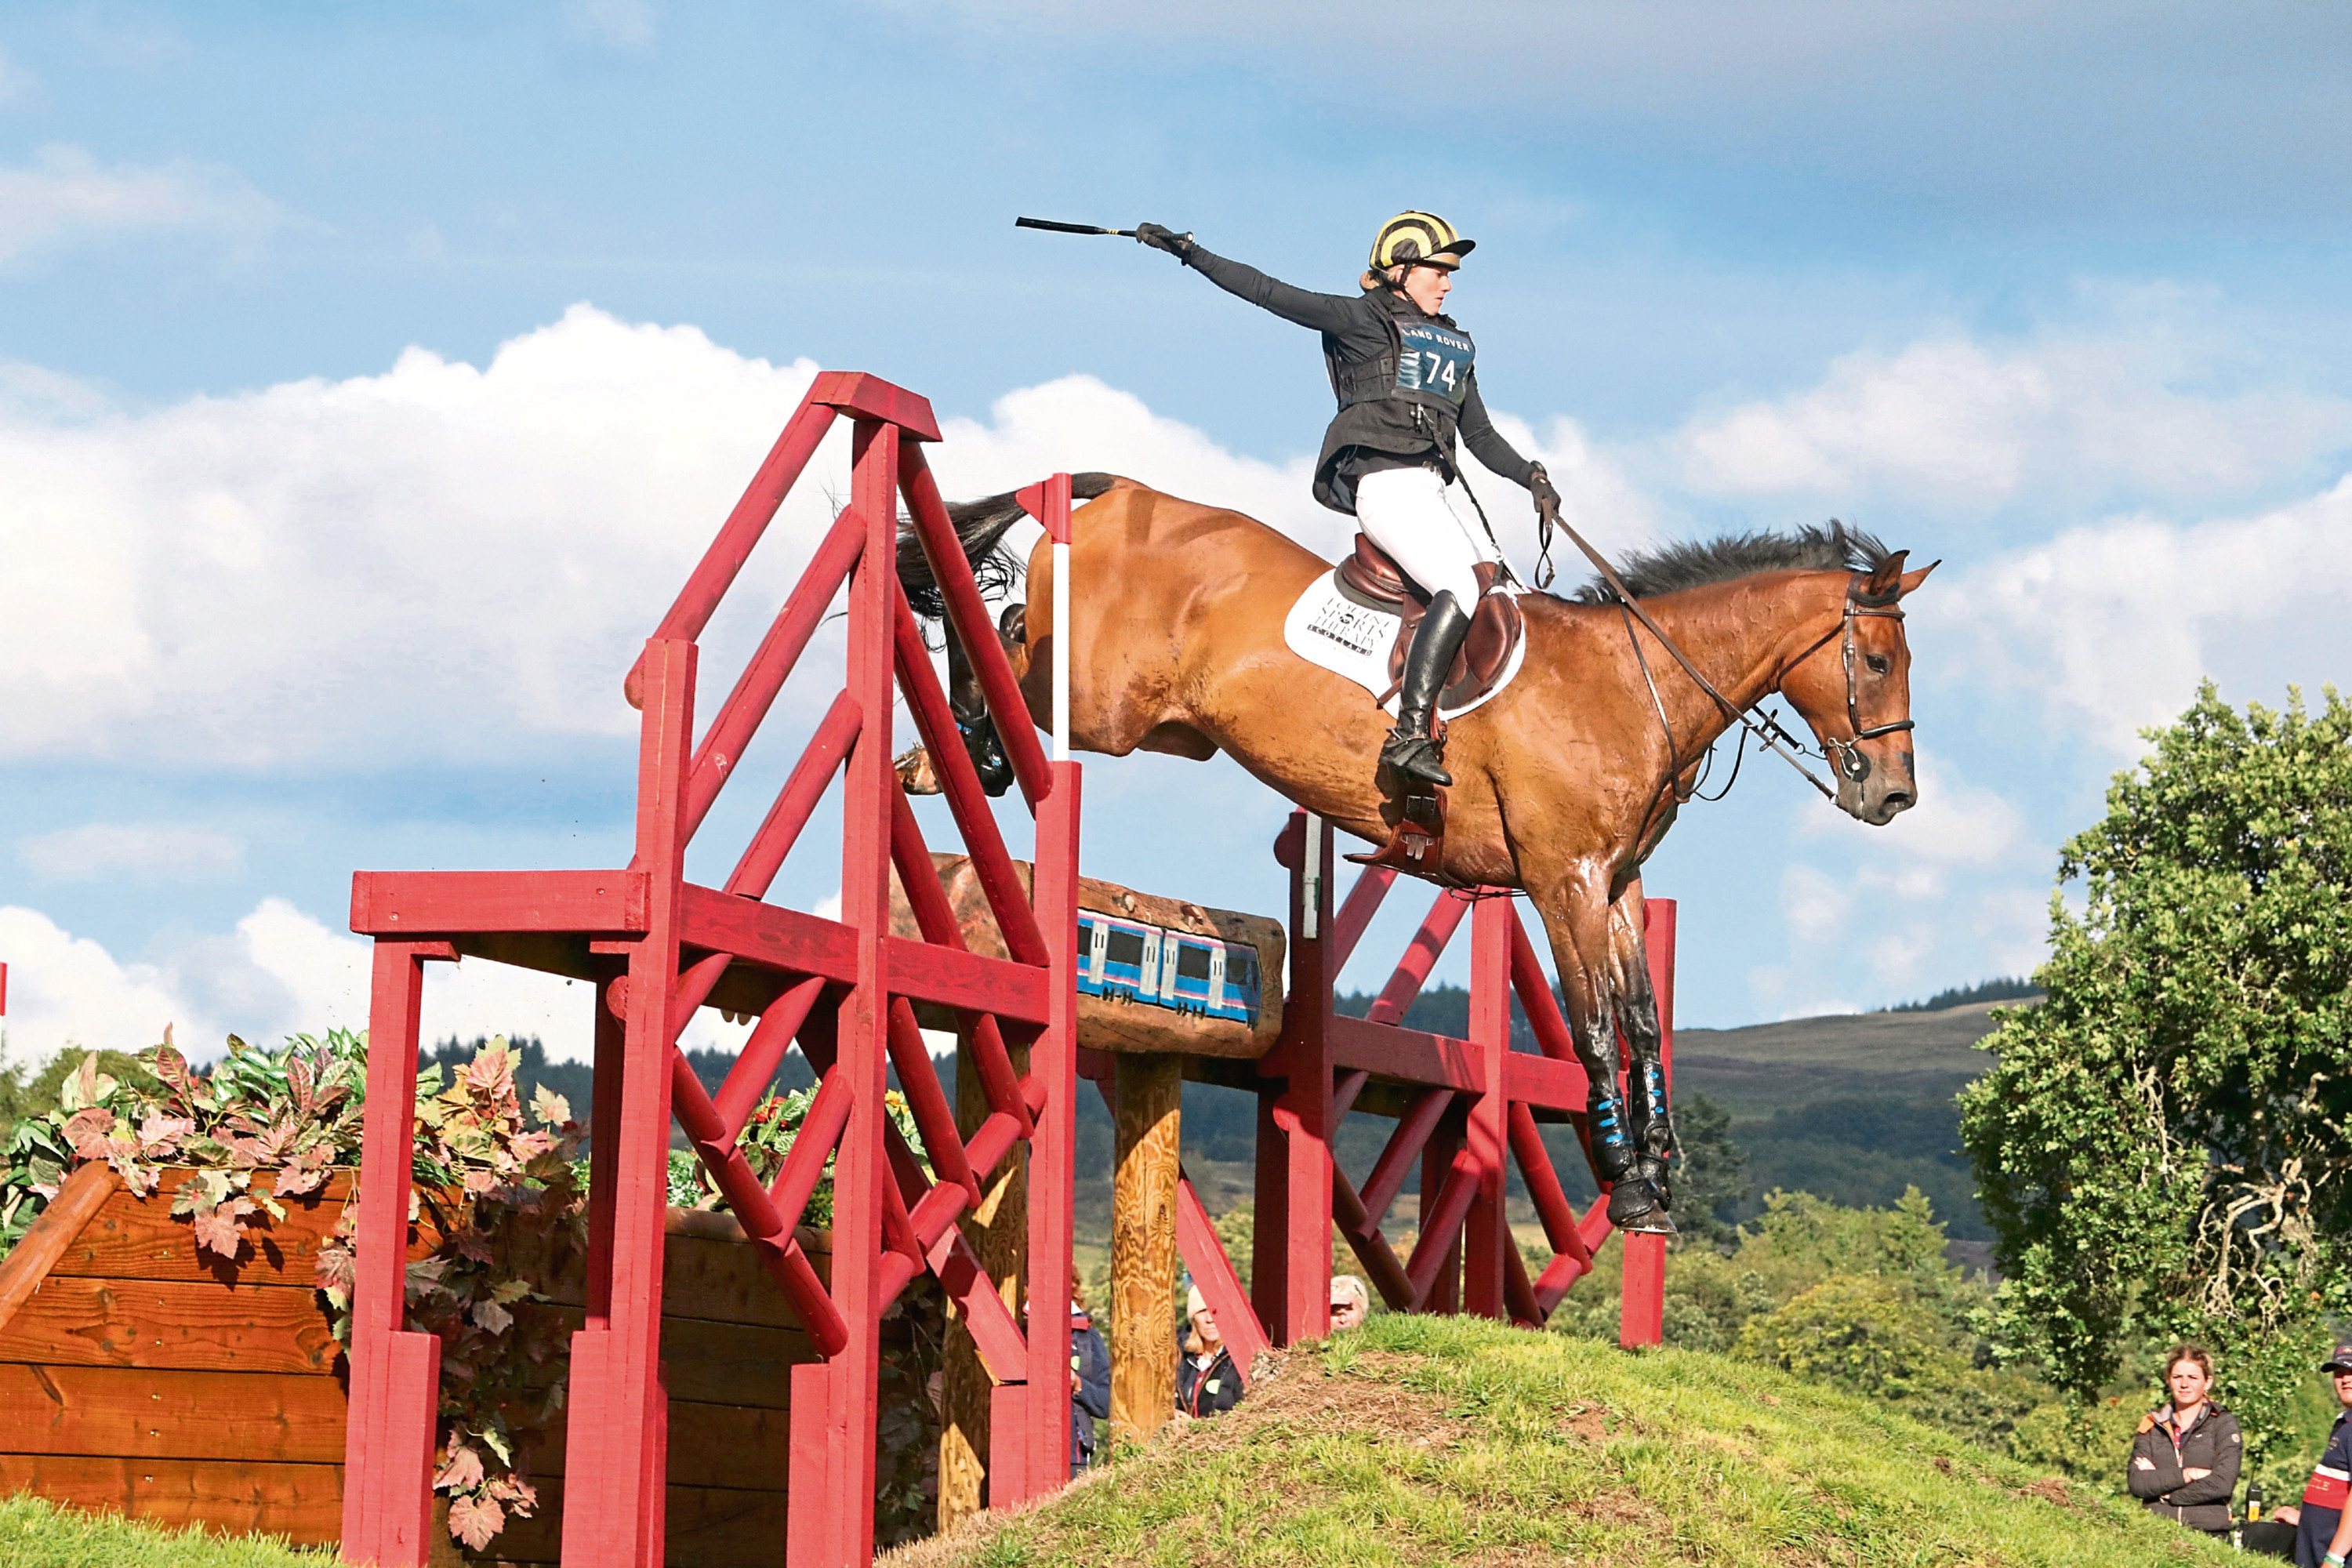 Blair Castle International Horse Trials offers a feast of fun and excitement for everyone.